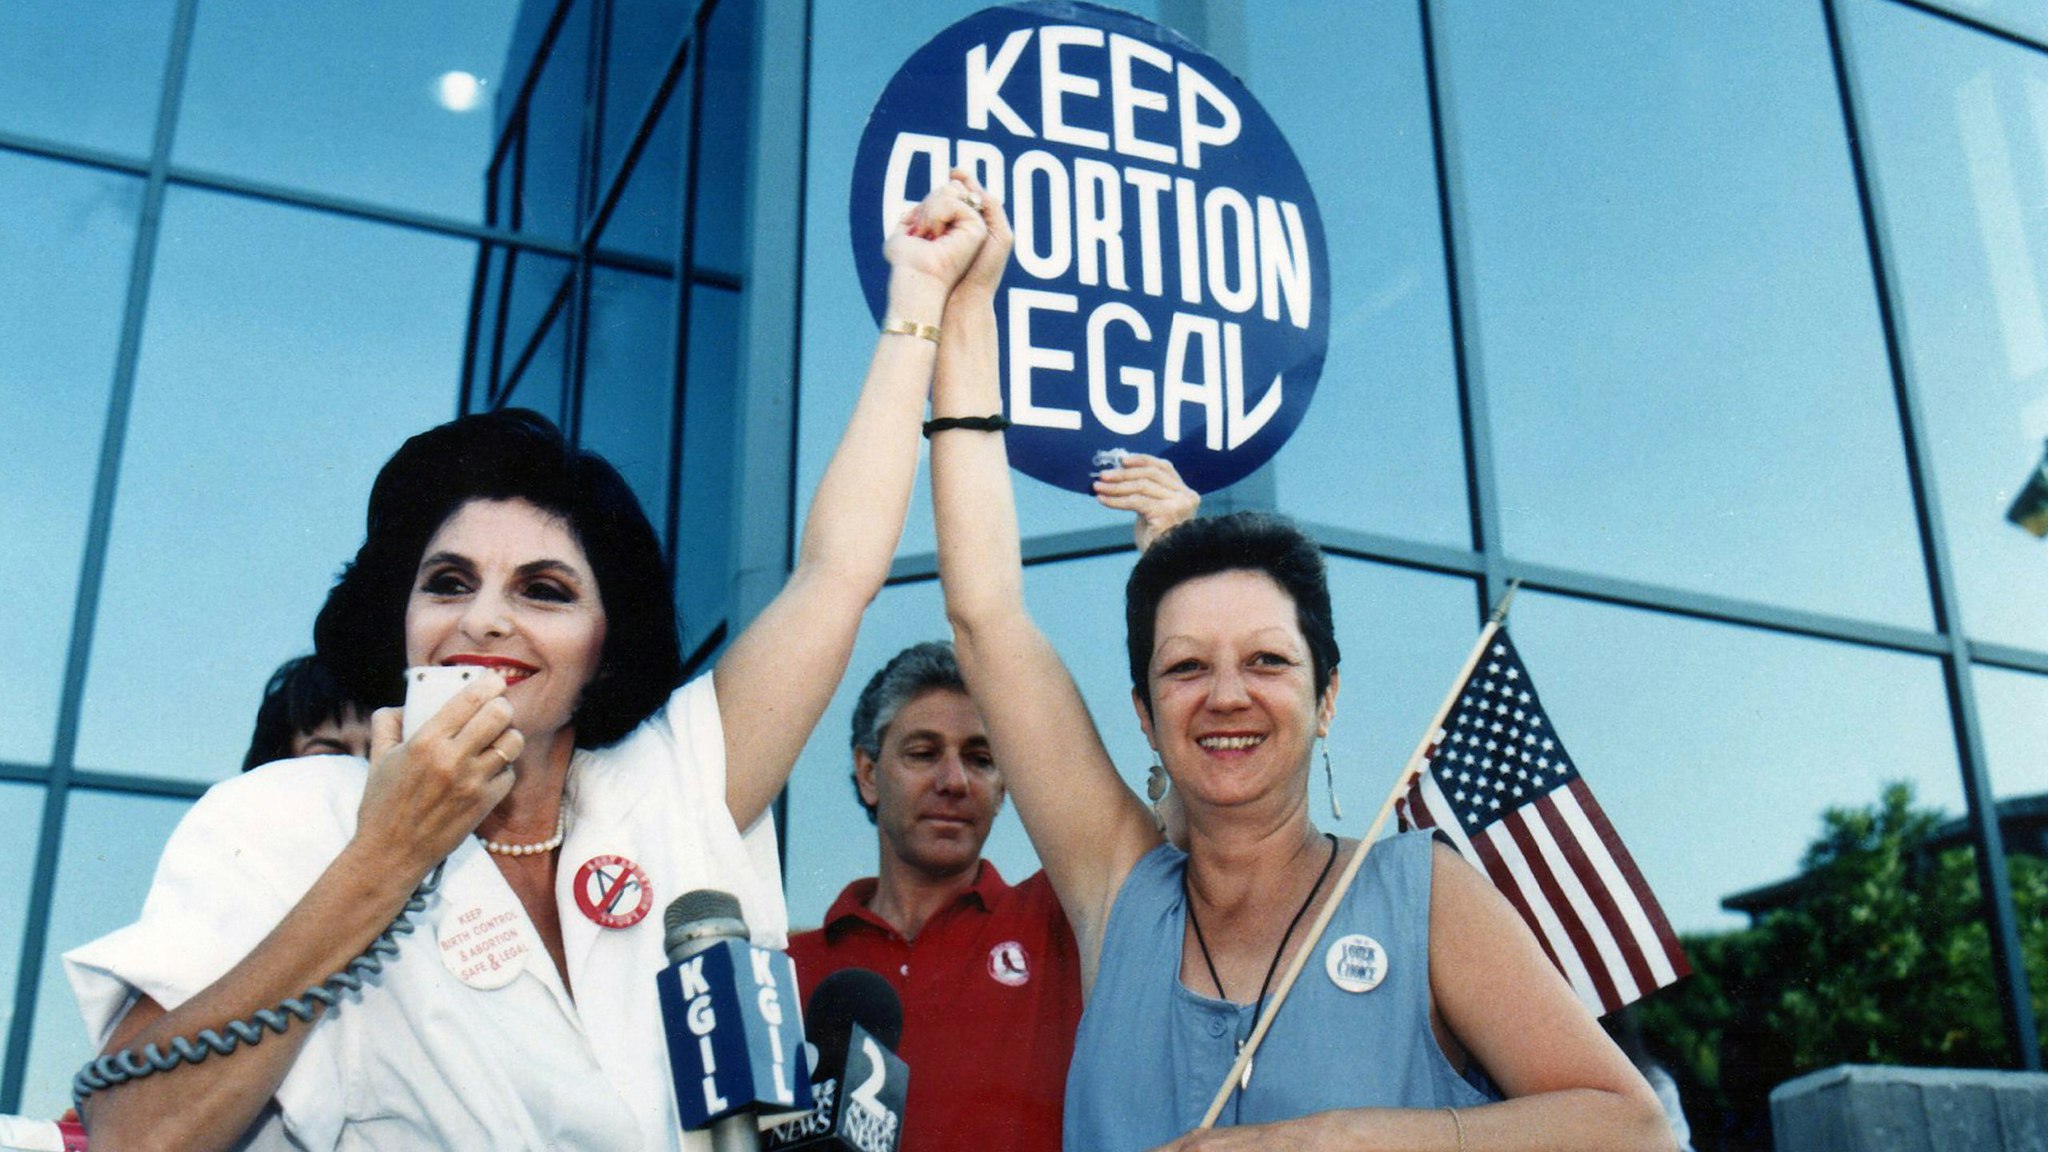 BURBANK, CA - JULY 4 : Attorney Gloria Allred and Norma McCorvey (R),'Jane Roe' plaintiff from Landmark court case Roe vs. Wade during Pro Choice Rally, July 4, 1989 in Burbank, California. (Photo by Bob Riha, Jr./Getty Images)